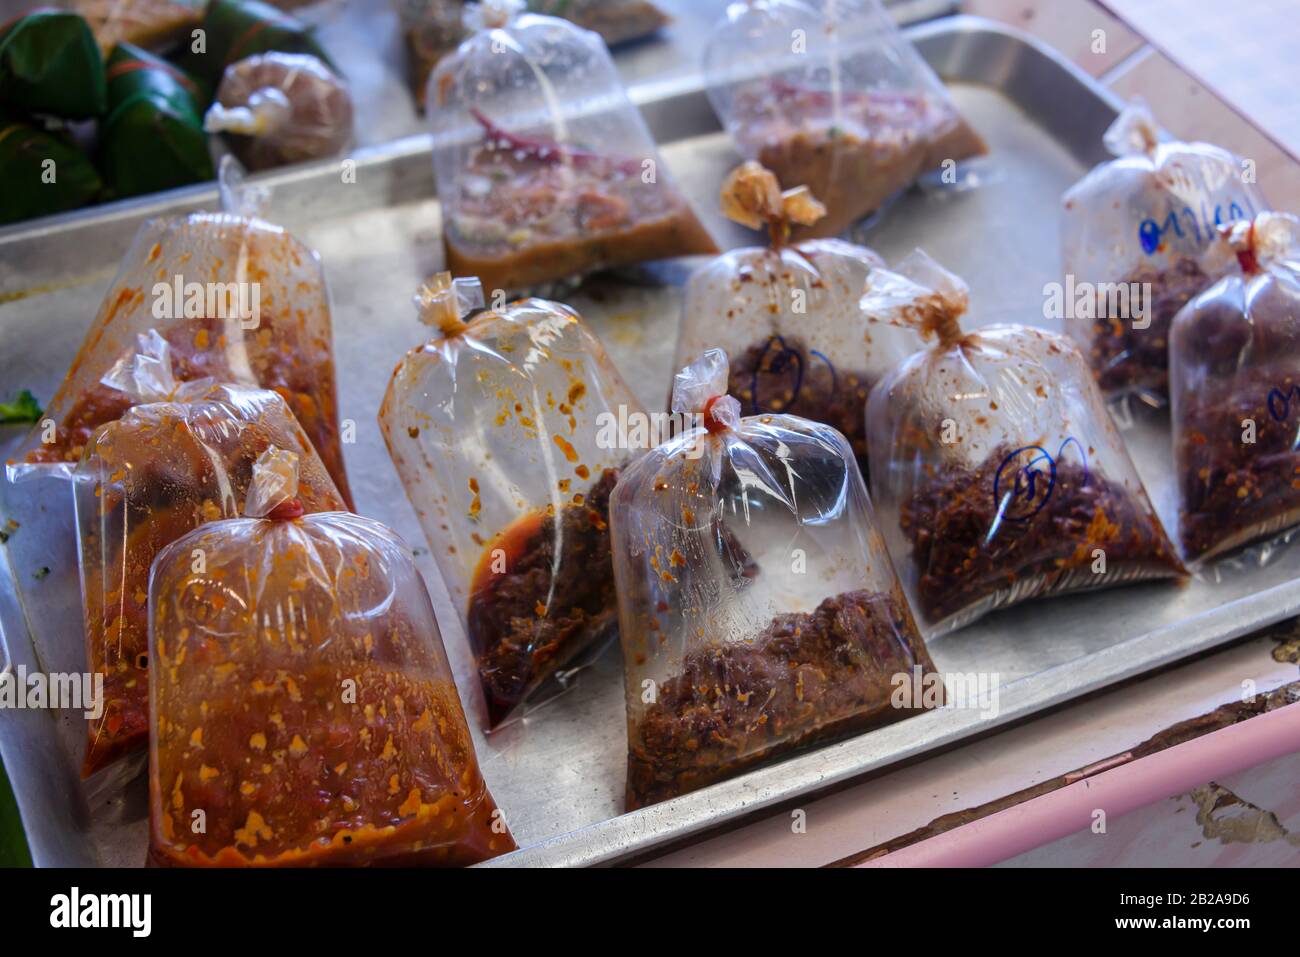 Plastic bags filled with traditional Thai cooking pastes on sale at a market stall, Phuket, Thailand Stock Photo